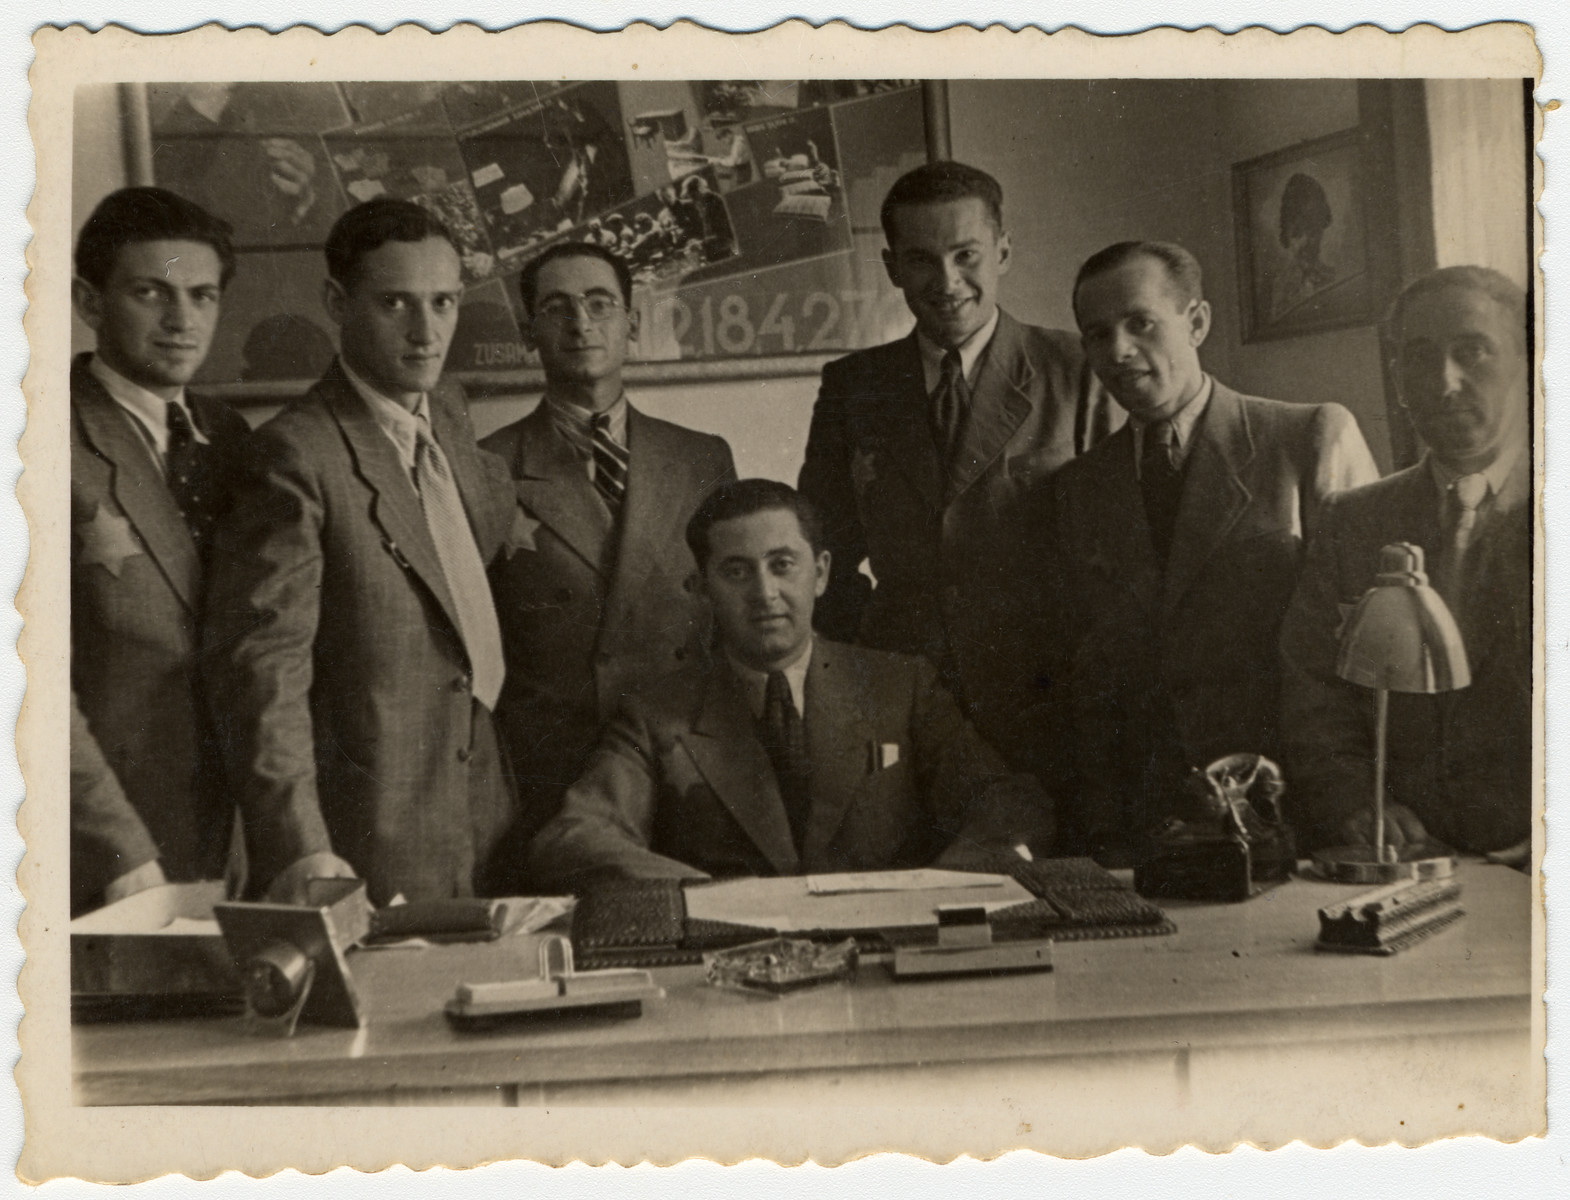 Group portrait of employees of the leather workshop in the Lodz ghetto standing in front of a large photographic collage.

Among those pictured is Leon Fajtlowicz (standing third from left).  He was the uncle of the donor and in charge of all the leather workshops in the ghetto.